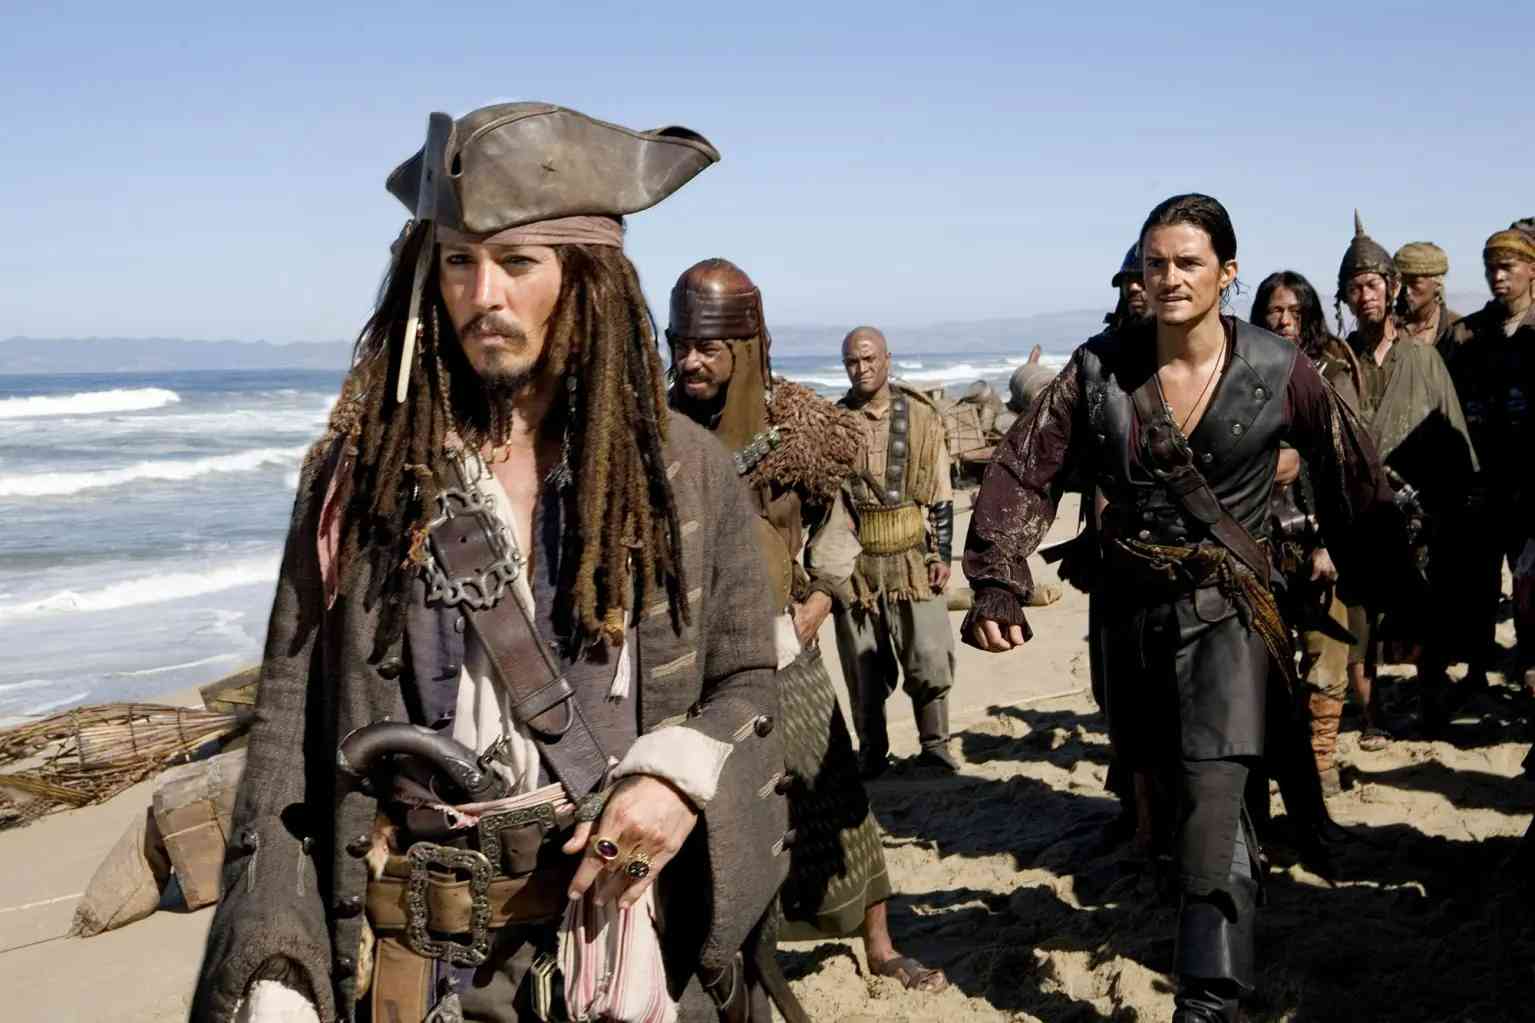 Pirates-of-the-Caribbean:-At-World's-End-in-Italy